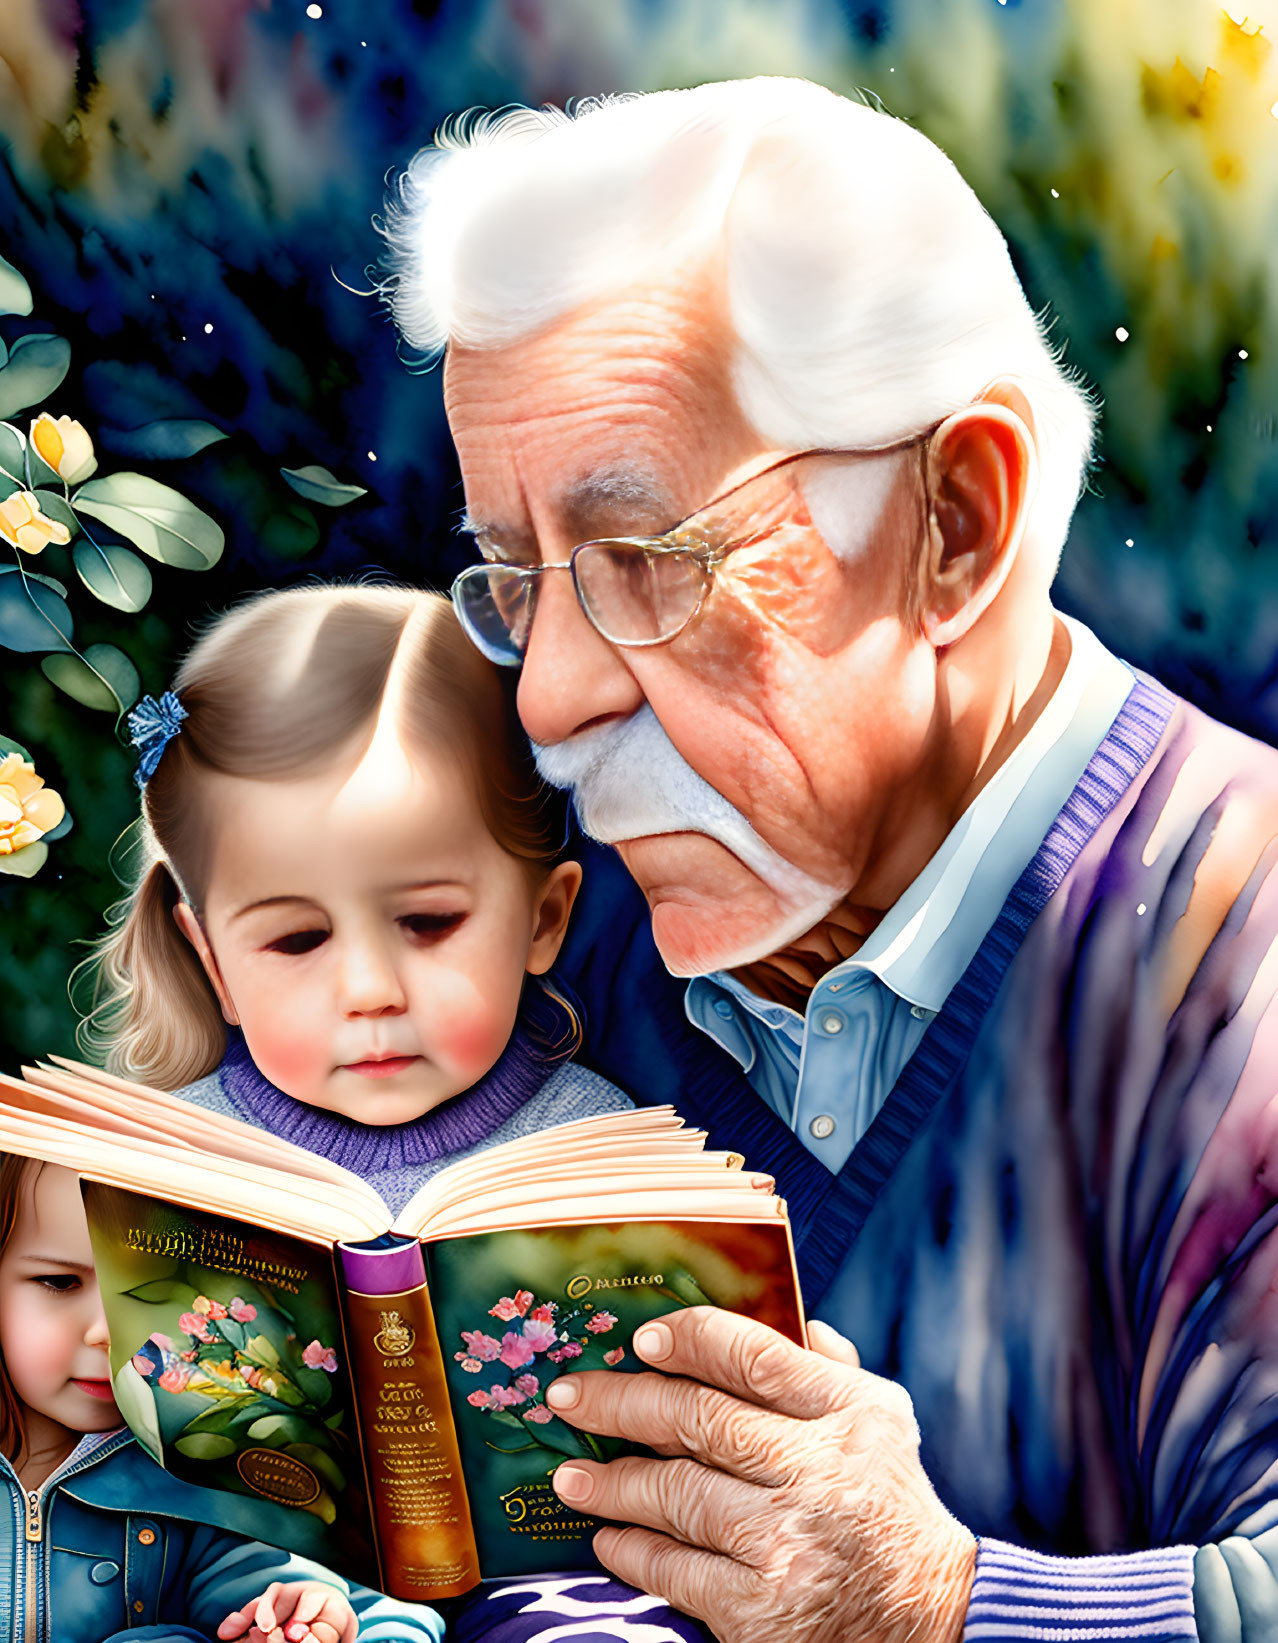 Elderly man reading book to young girl in floral setting